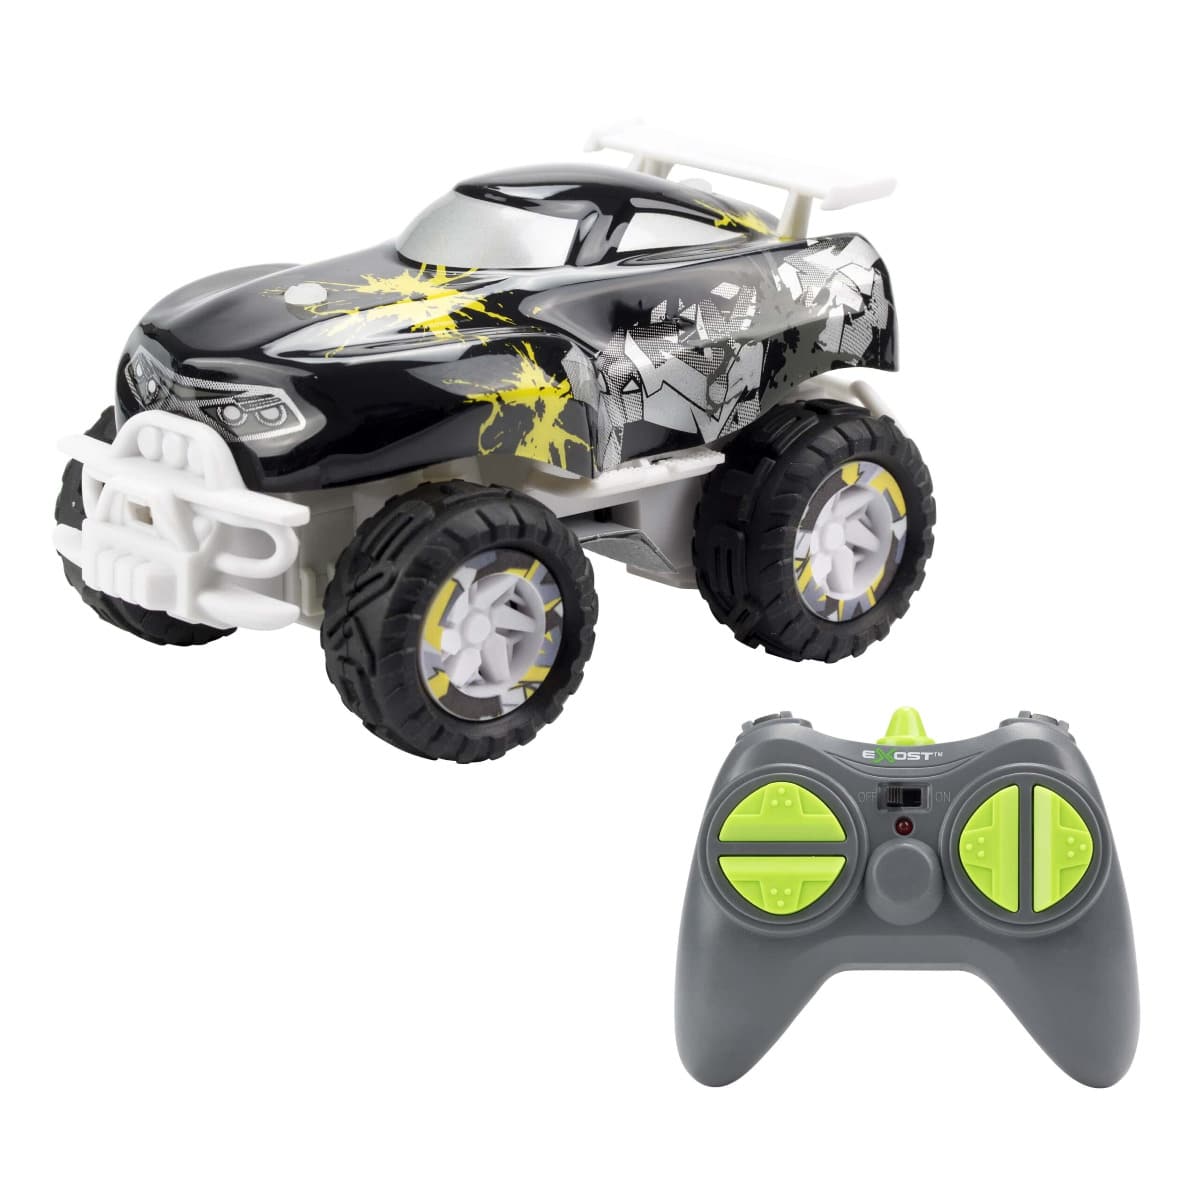 Silverlit Exost X-monster RC-auto